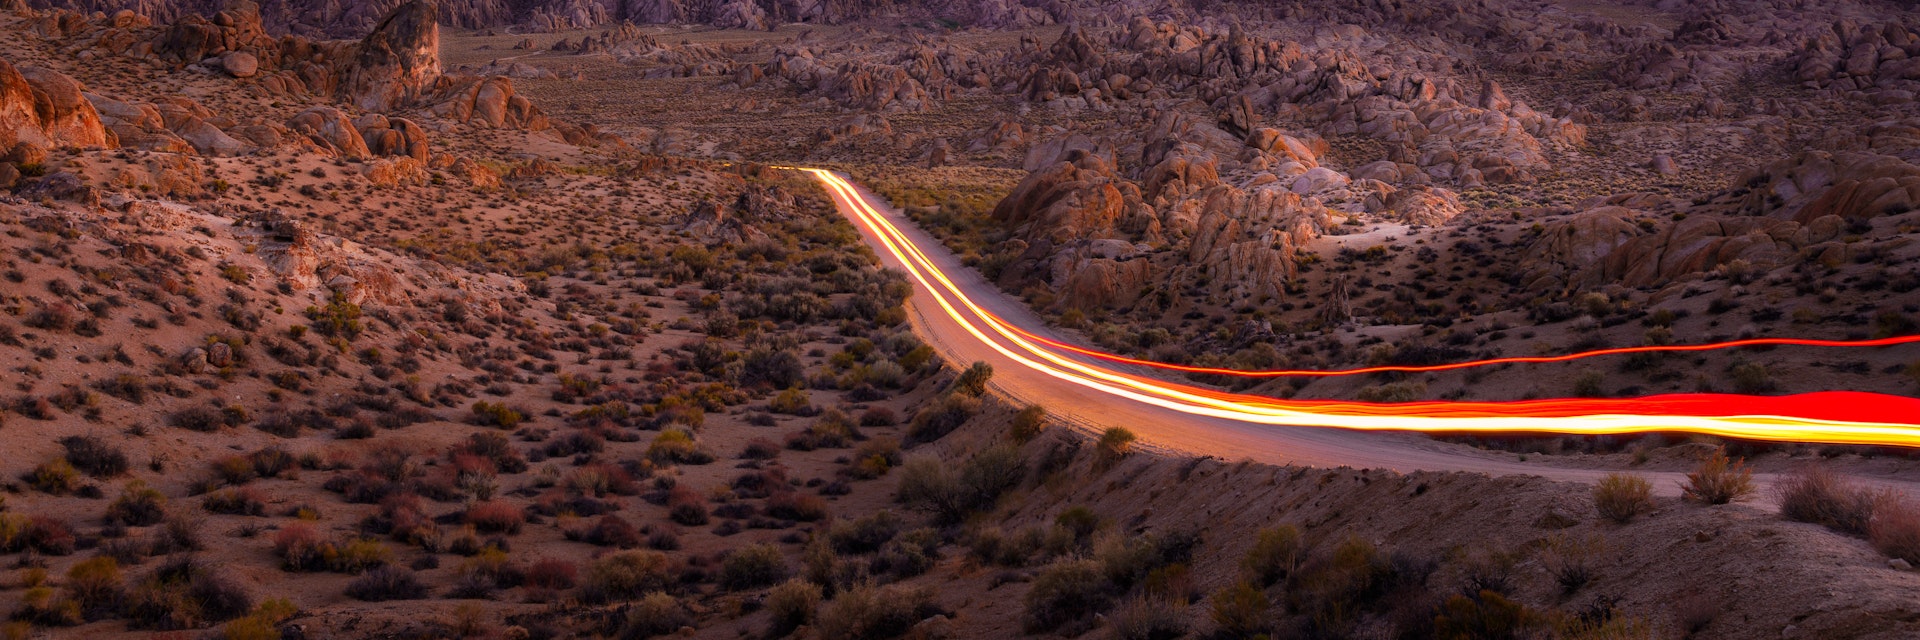 Colorful Light Trail Scenic Road with Lone Pine of Alabama Hills, California; Shutterstock ID 1577265994; your: Meghan O'Dea; gl: 65050; netsuite: Digital Editorial; full: POI